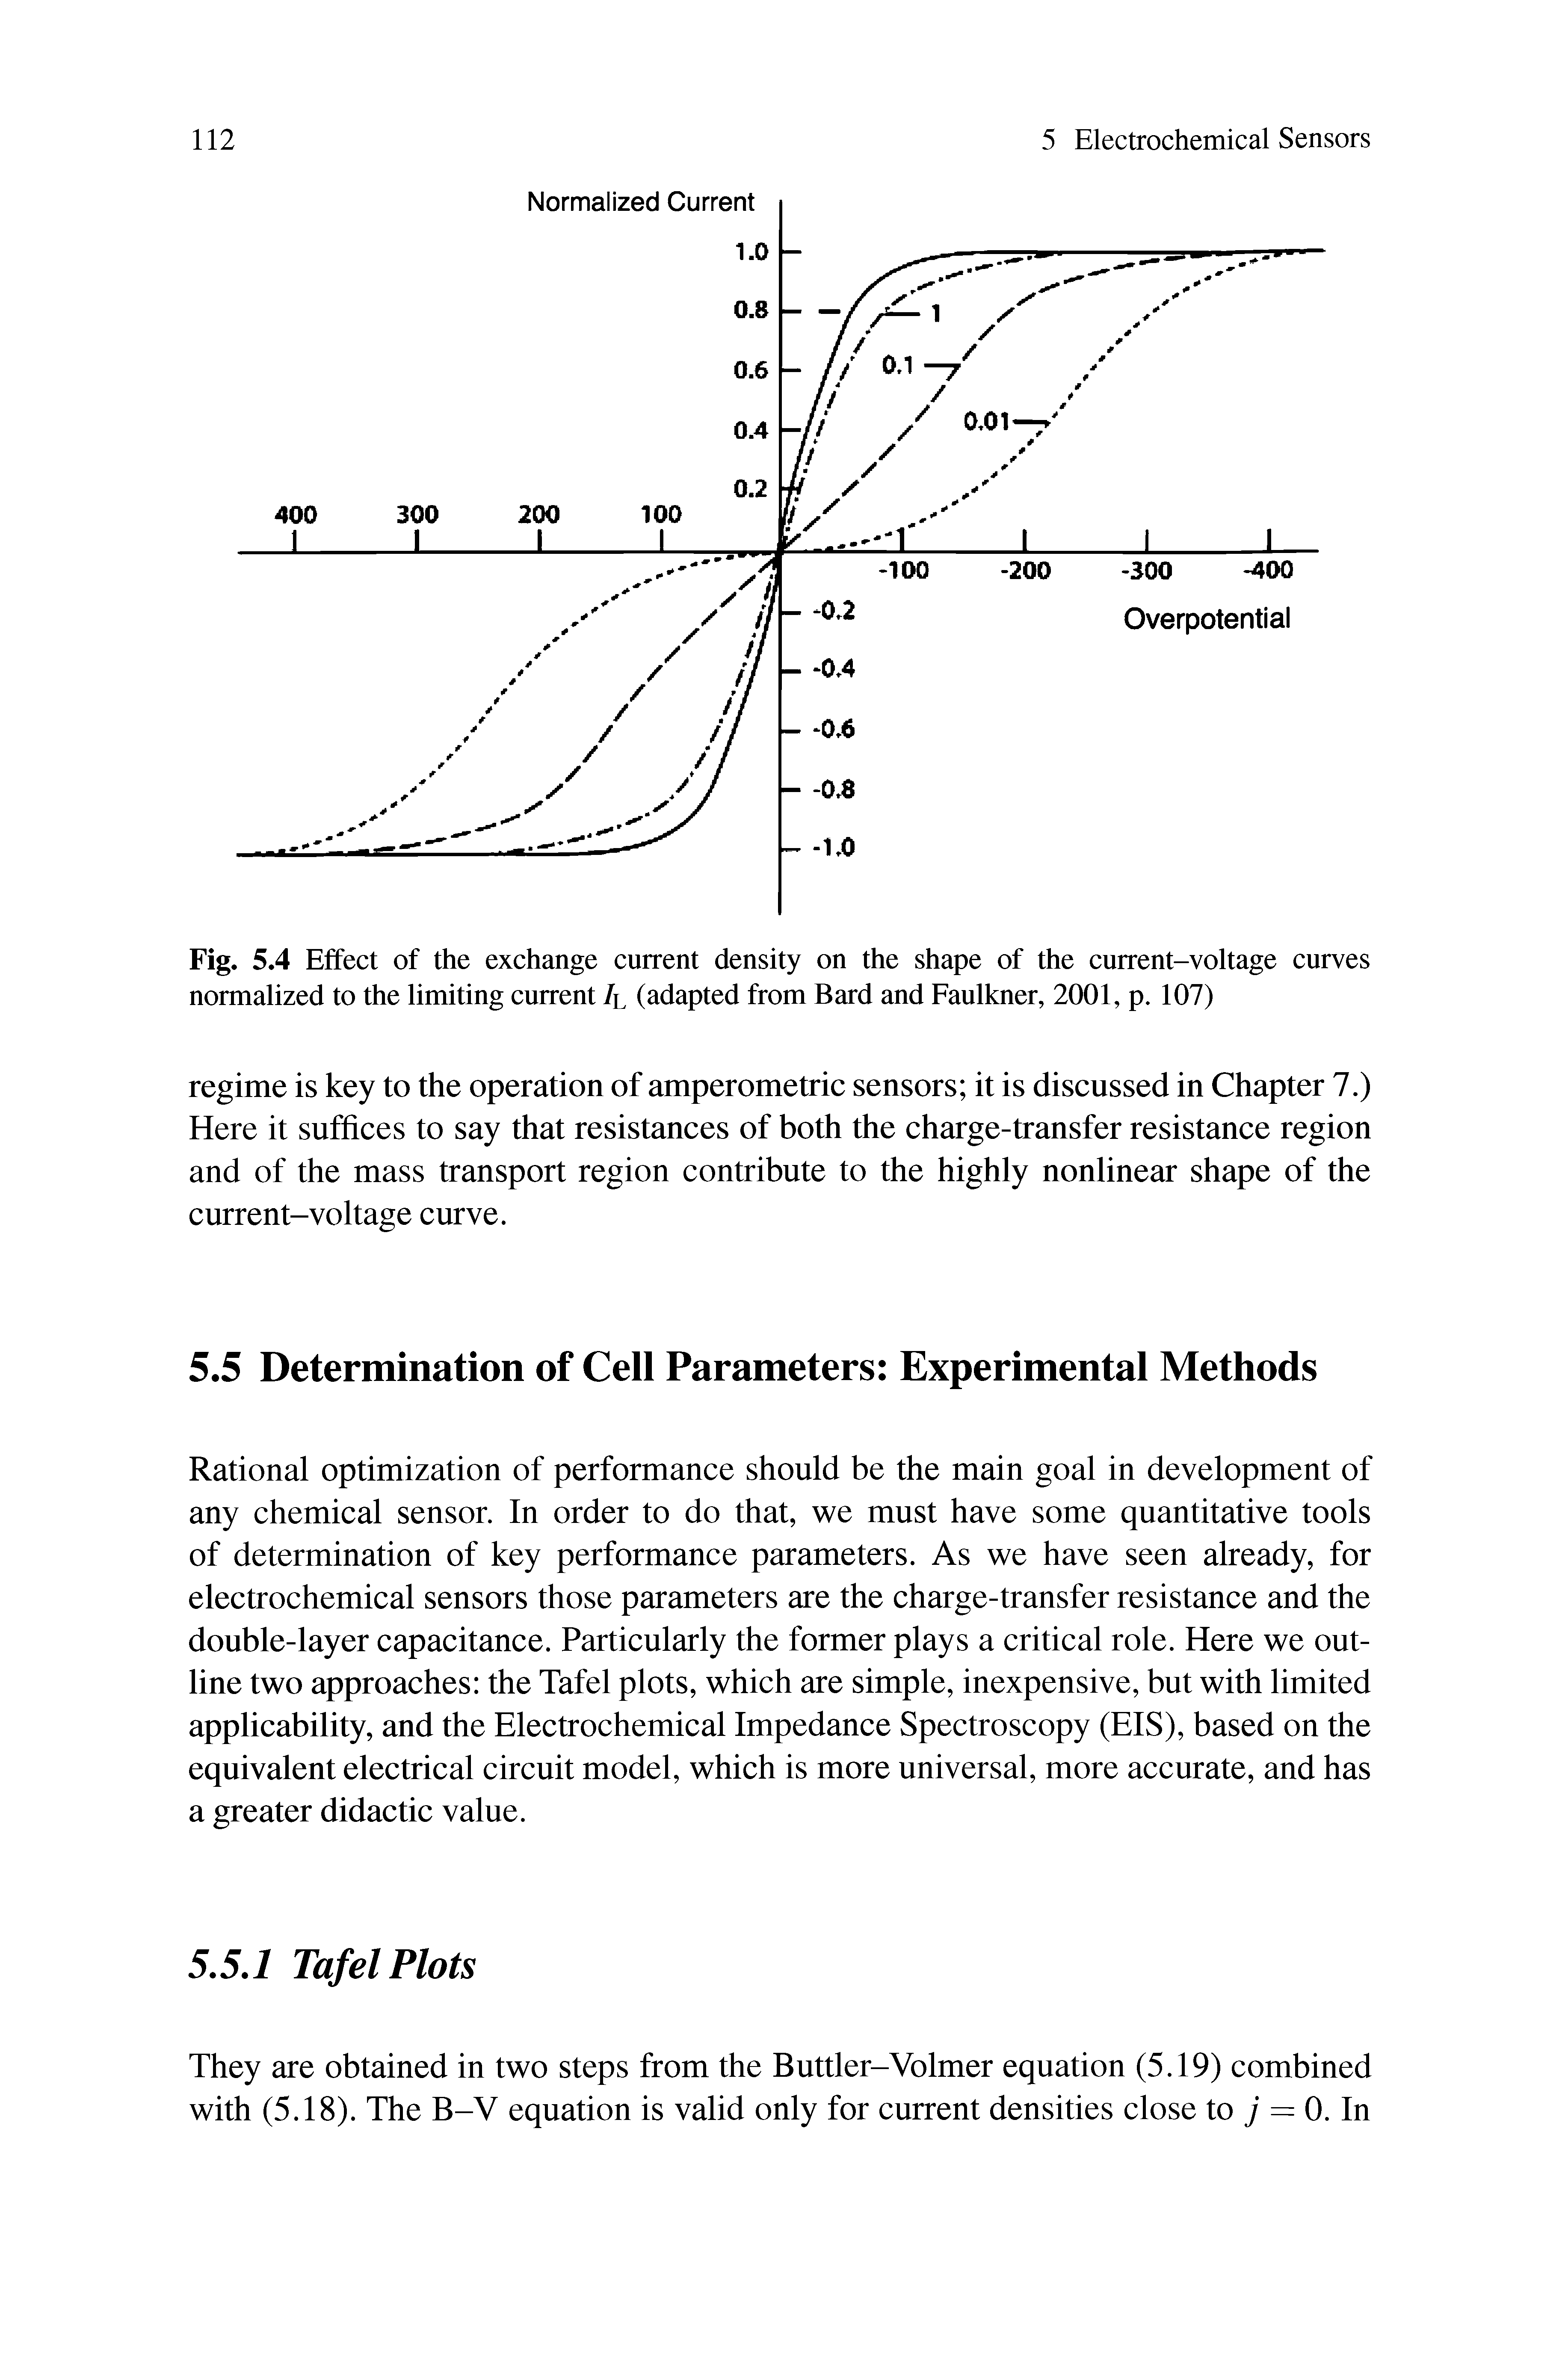 Fig. 5.4 Effect of the exchange current density on the shape of the current-voltage curves normalized to the limiting current 7l (adapted from Bard and Faulkner, 2001, p. 107)...